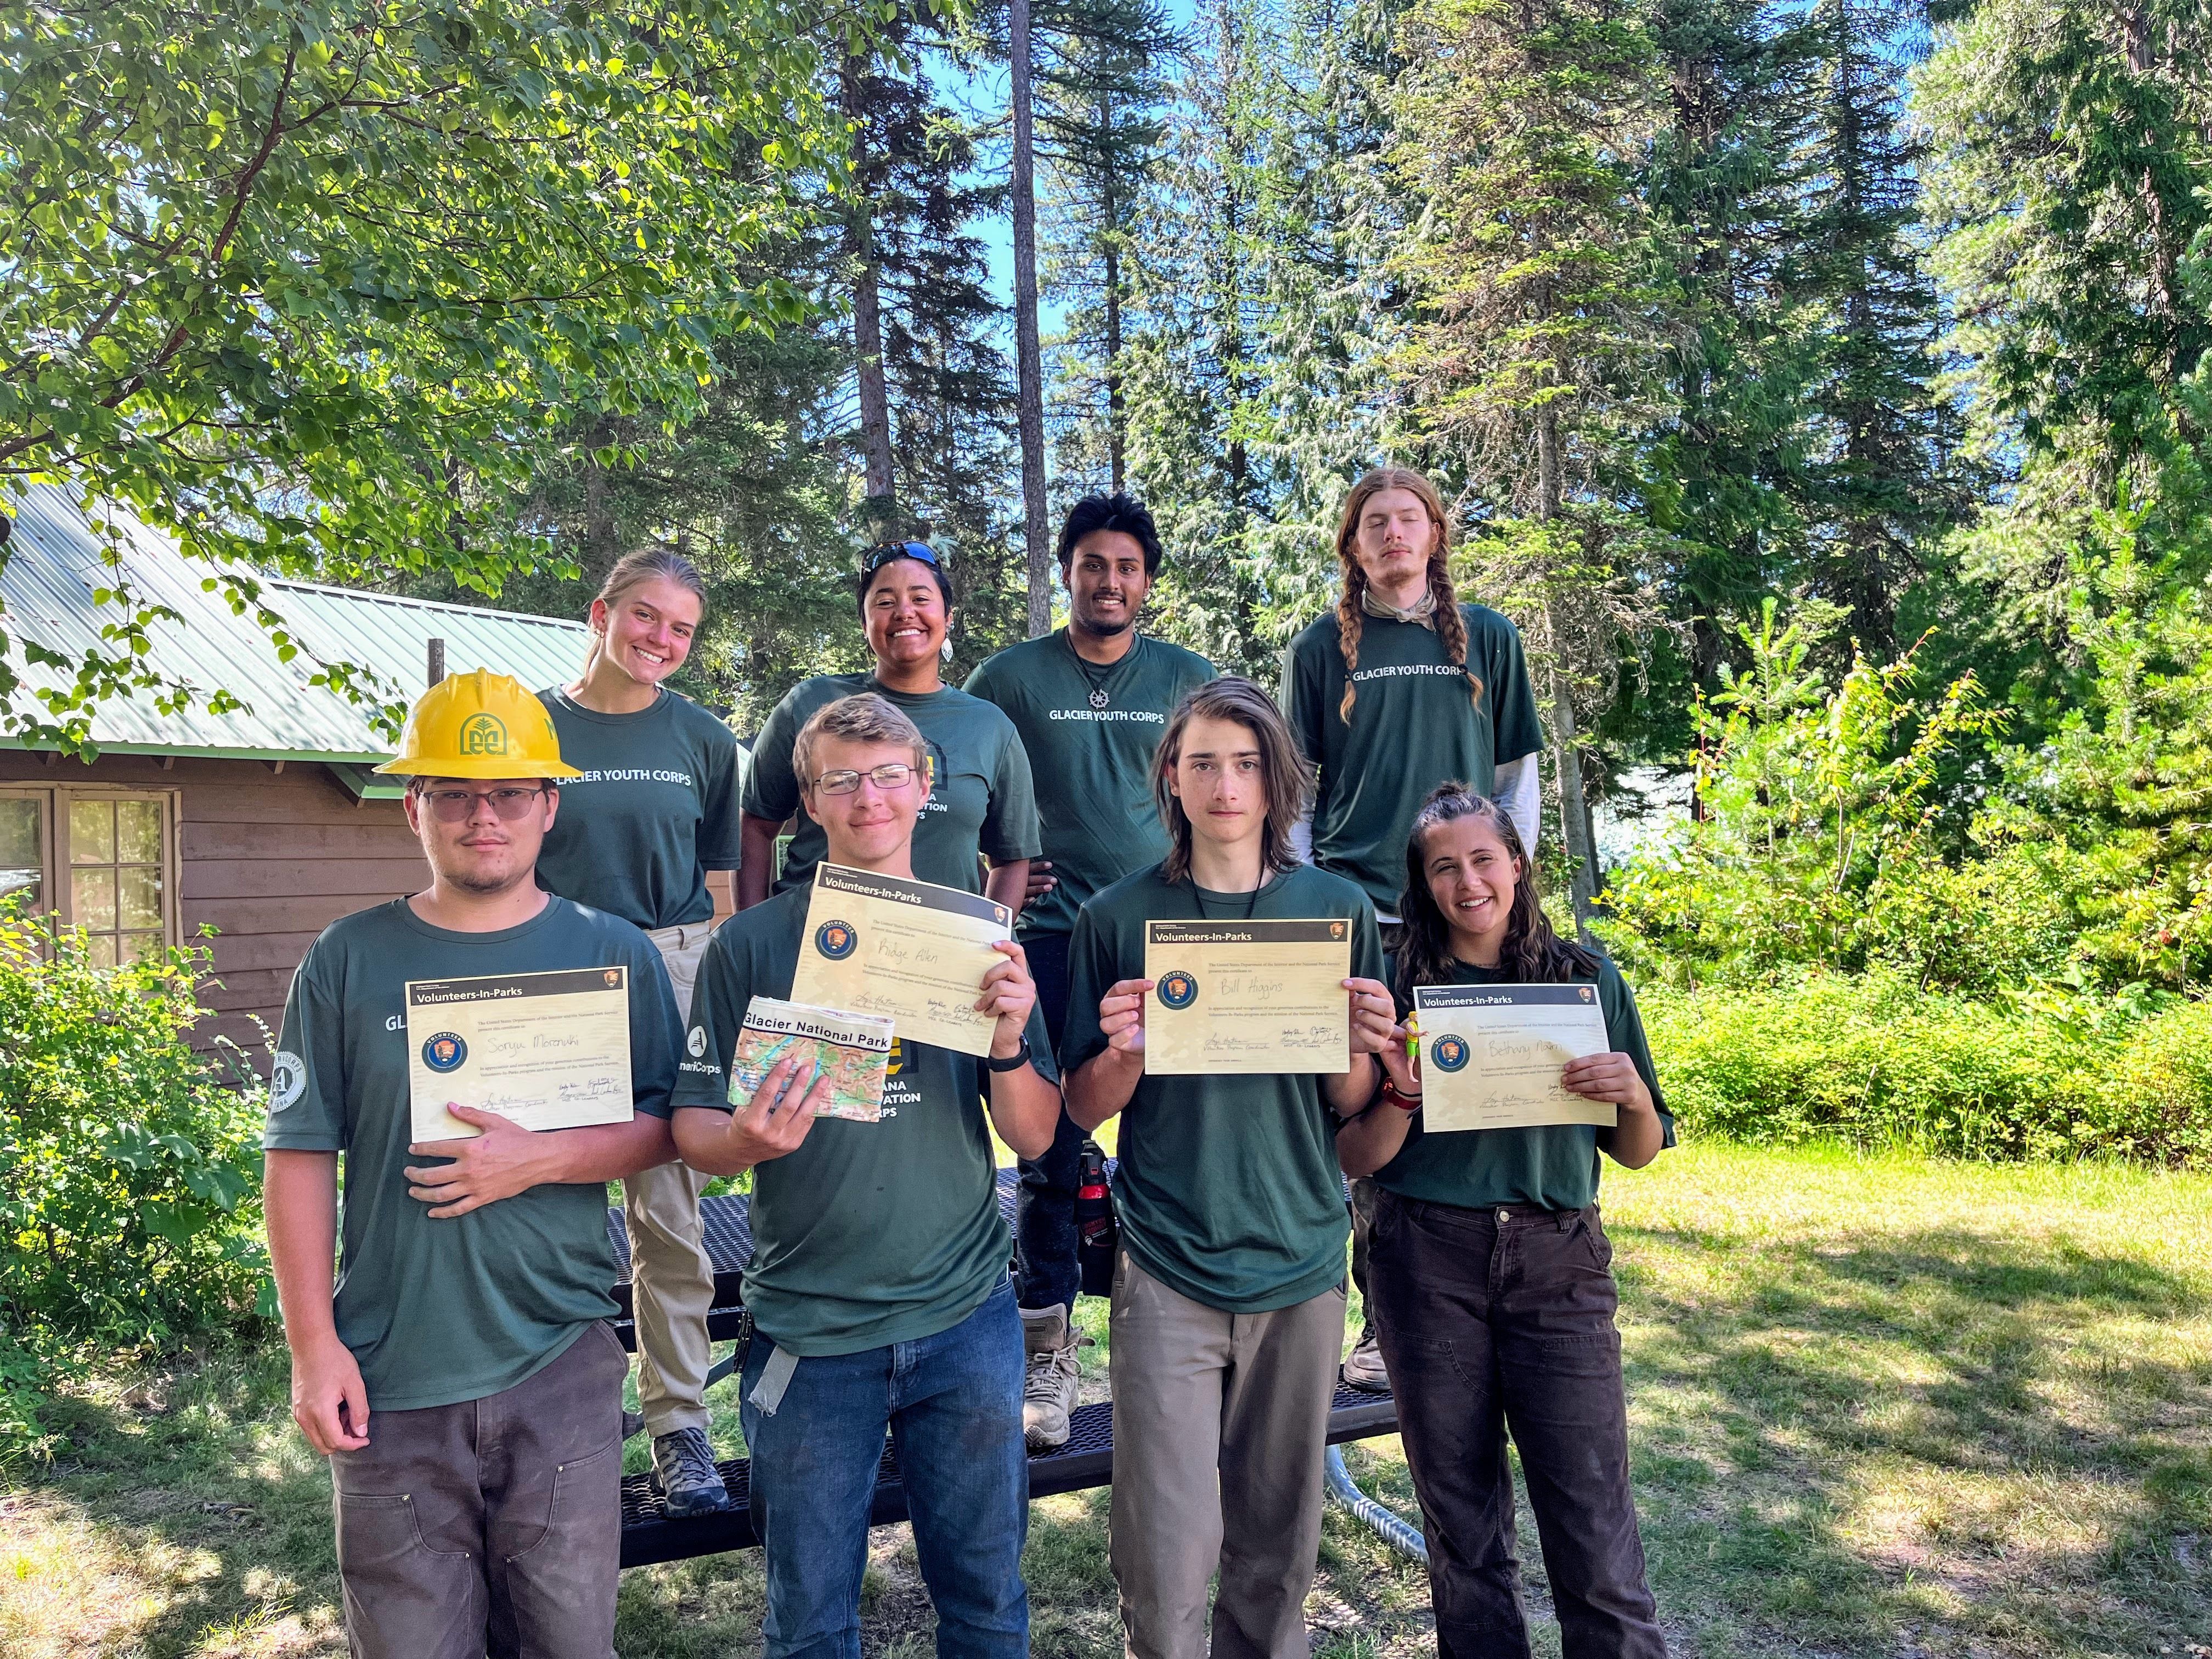 The crew poses with their certificates of completion.